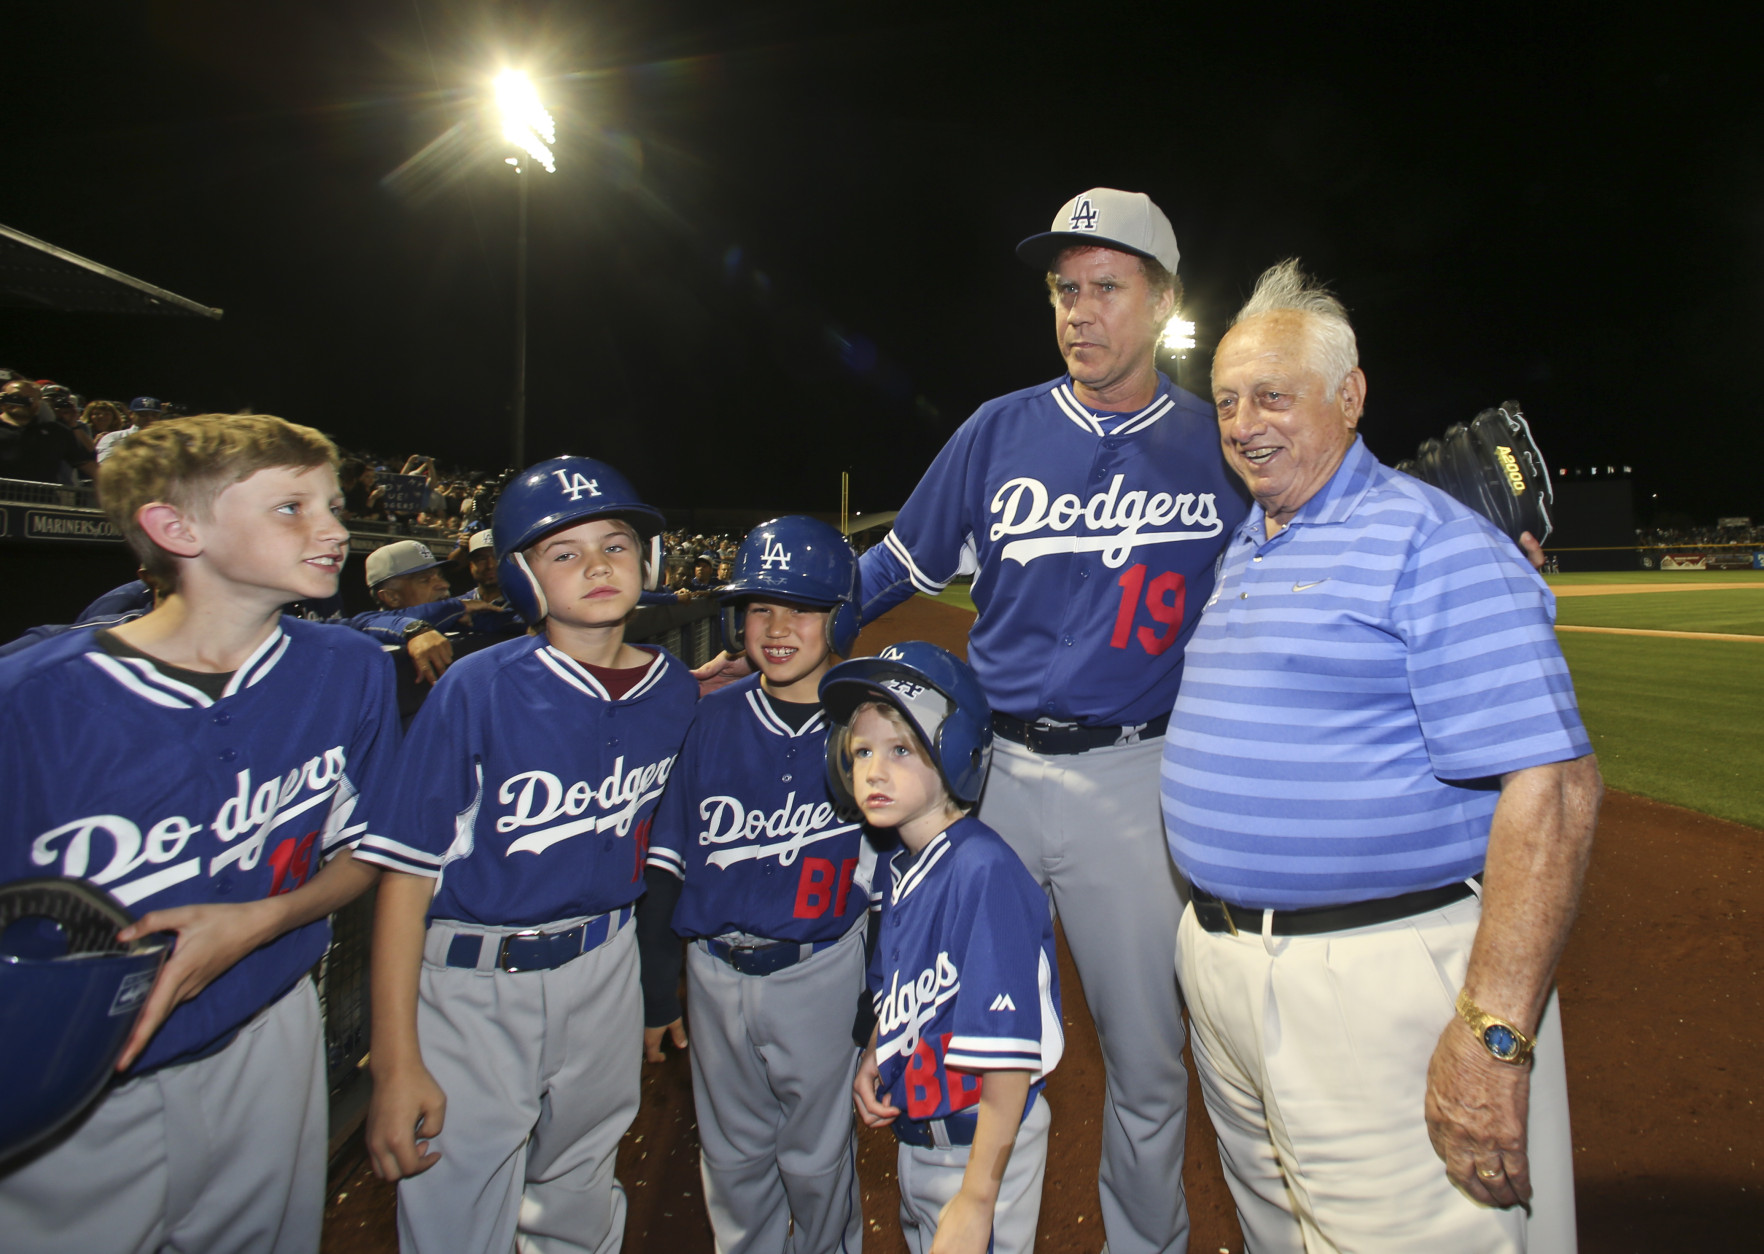 Actor Will Ferrellposes with former Los Angeles Dodgers manager Tommy Lasorda and bat boys  during a spring training baseball game between the San Diego Padres and the Los Angeles Dodgers Thursday, March 12, 2015, in Peoria, Ariz.  (AP Photo/Lenny Ignelzi)